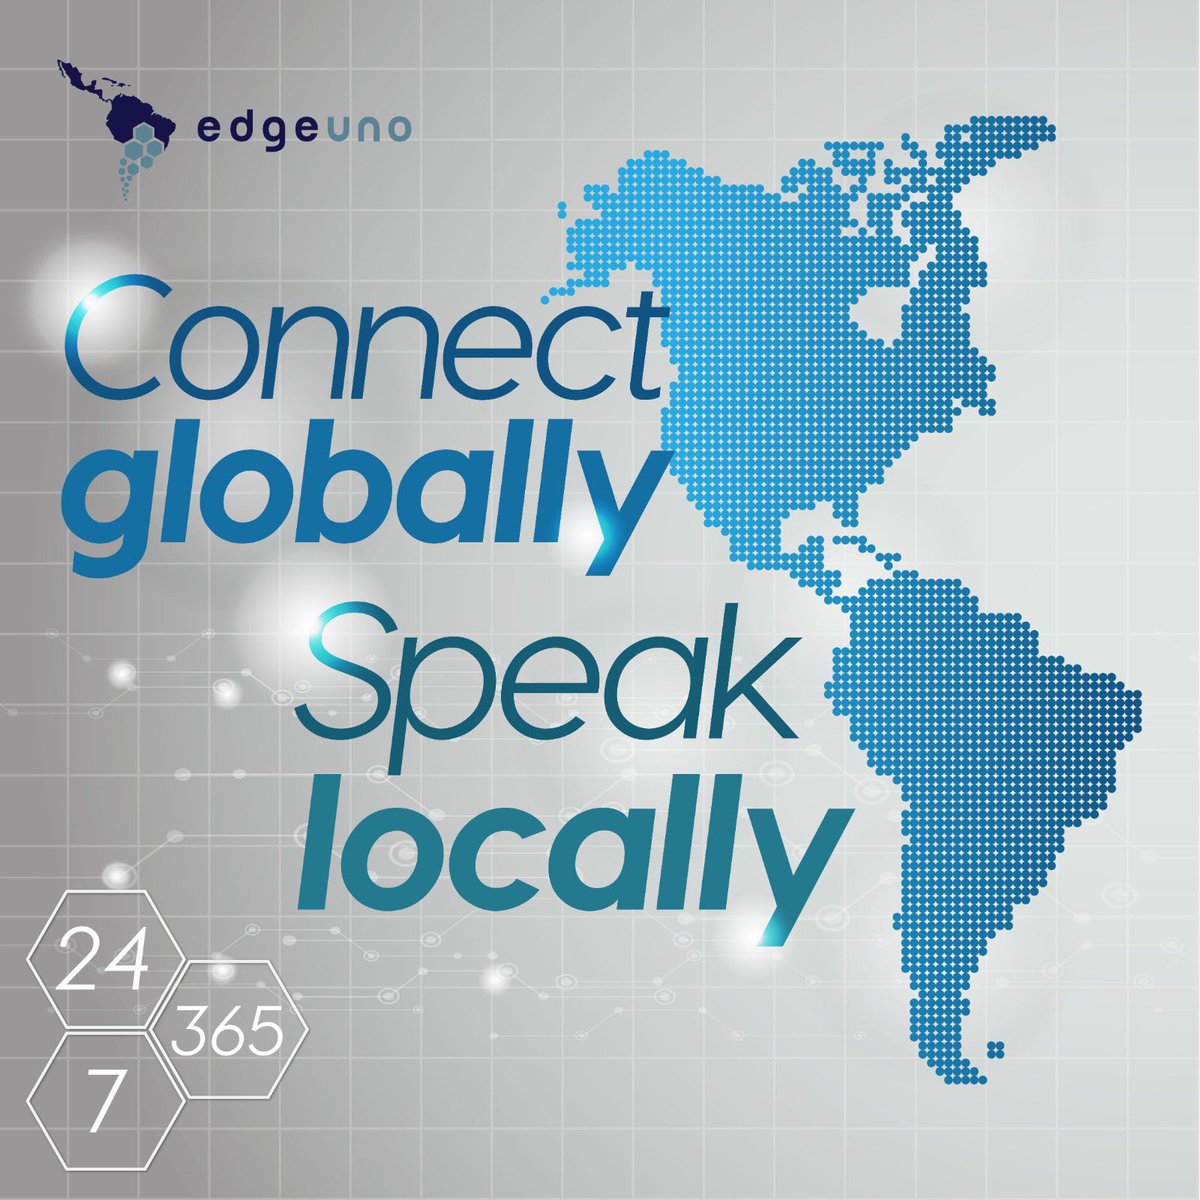 Stay connected with our 24/7/365 multilingual support system! 🌐🚀 Whether you speak #Spanish, #English, or #Portuguese, our support team has you covered 🌟 Say goodbye to language barriers and hello to effortless communication! edgeuno.com #Edgeuno #AS7195…